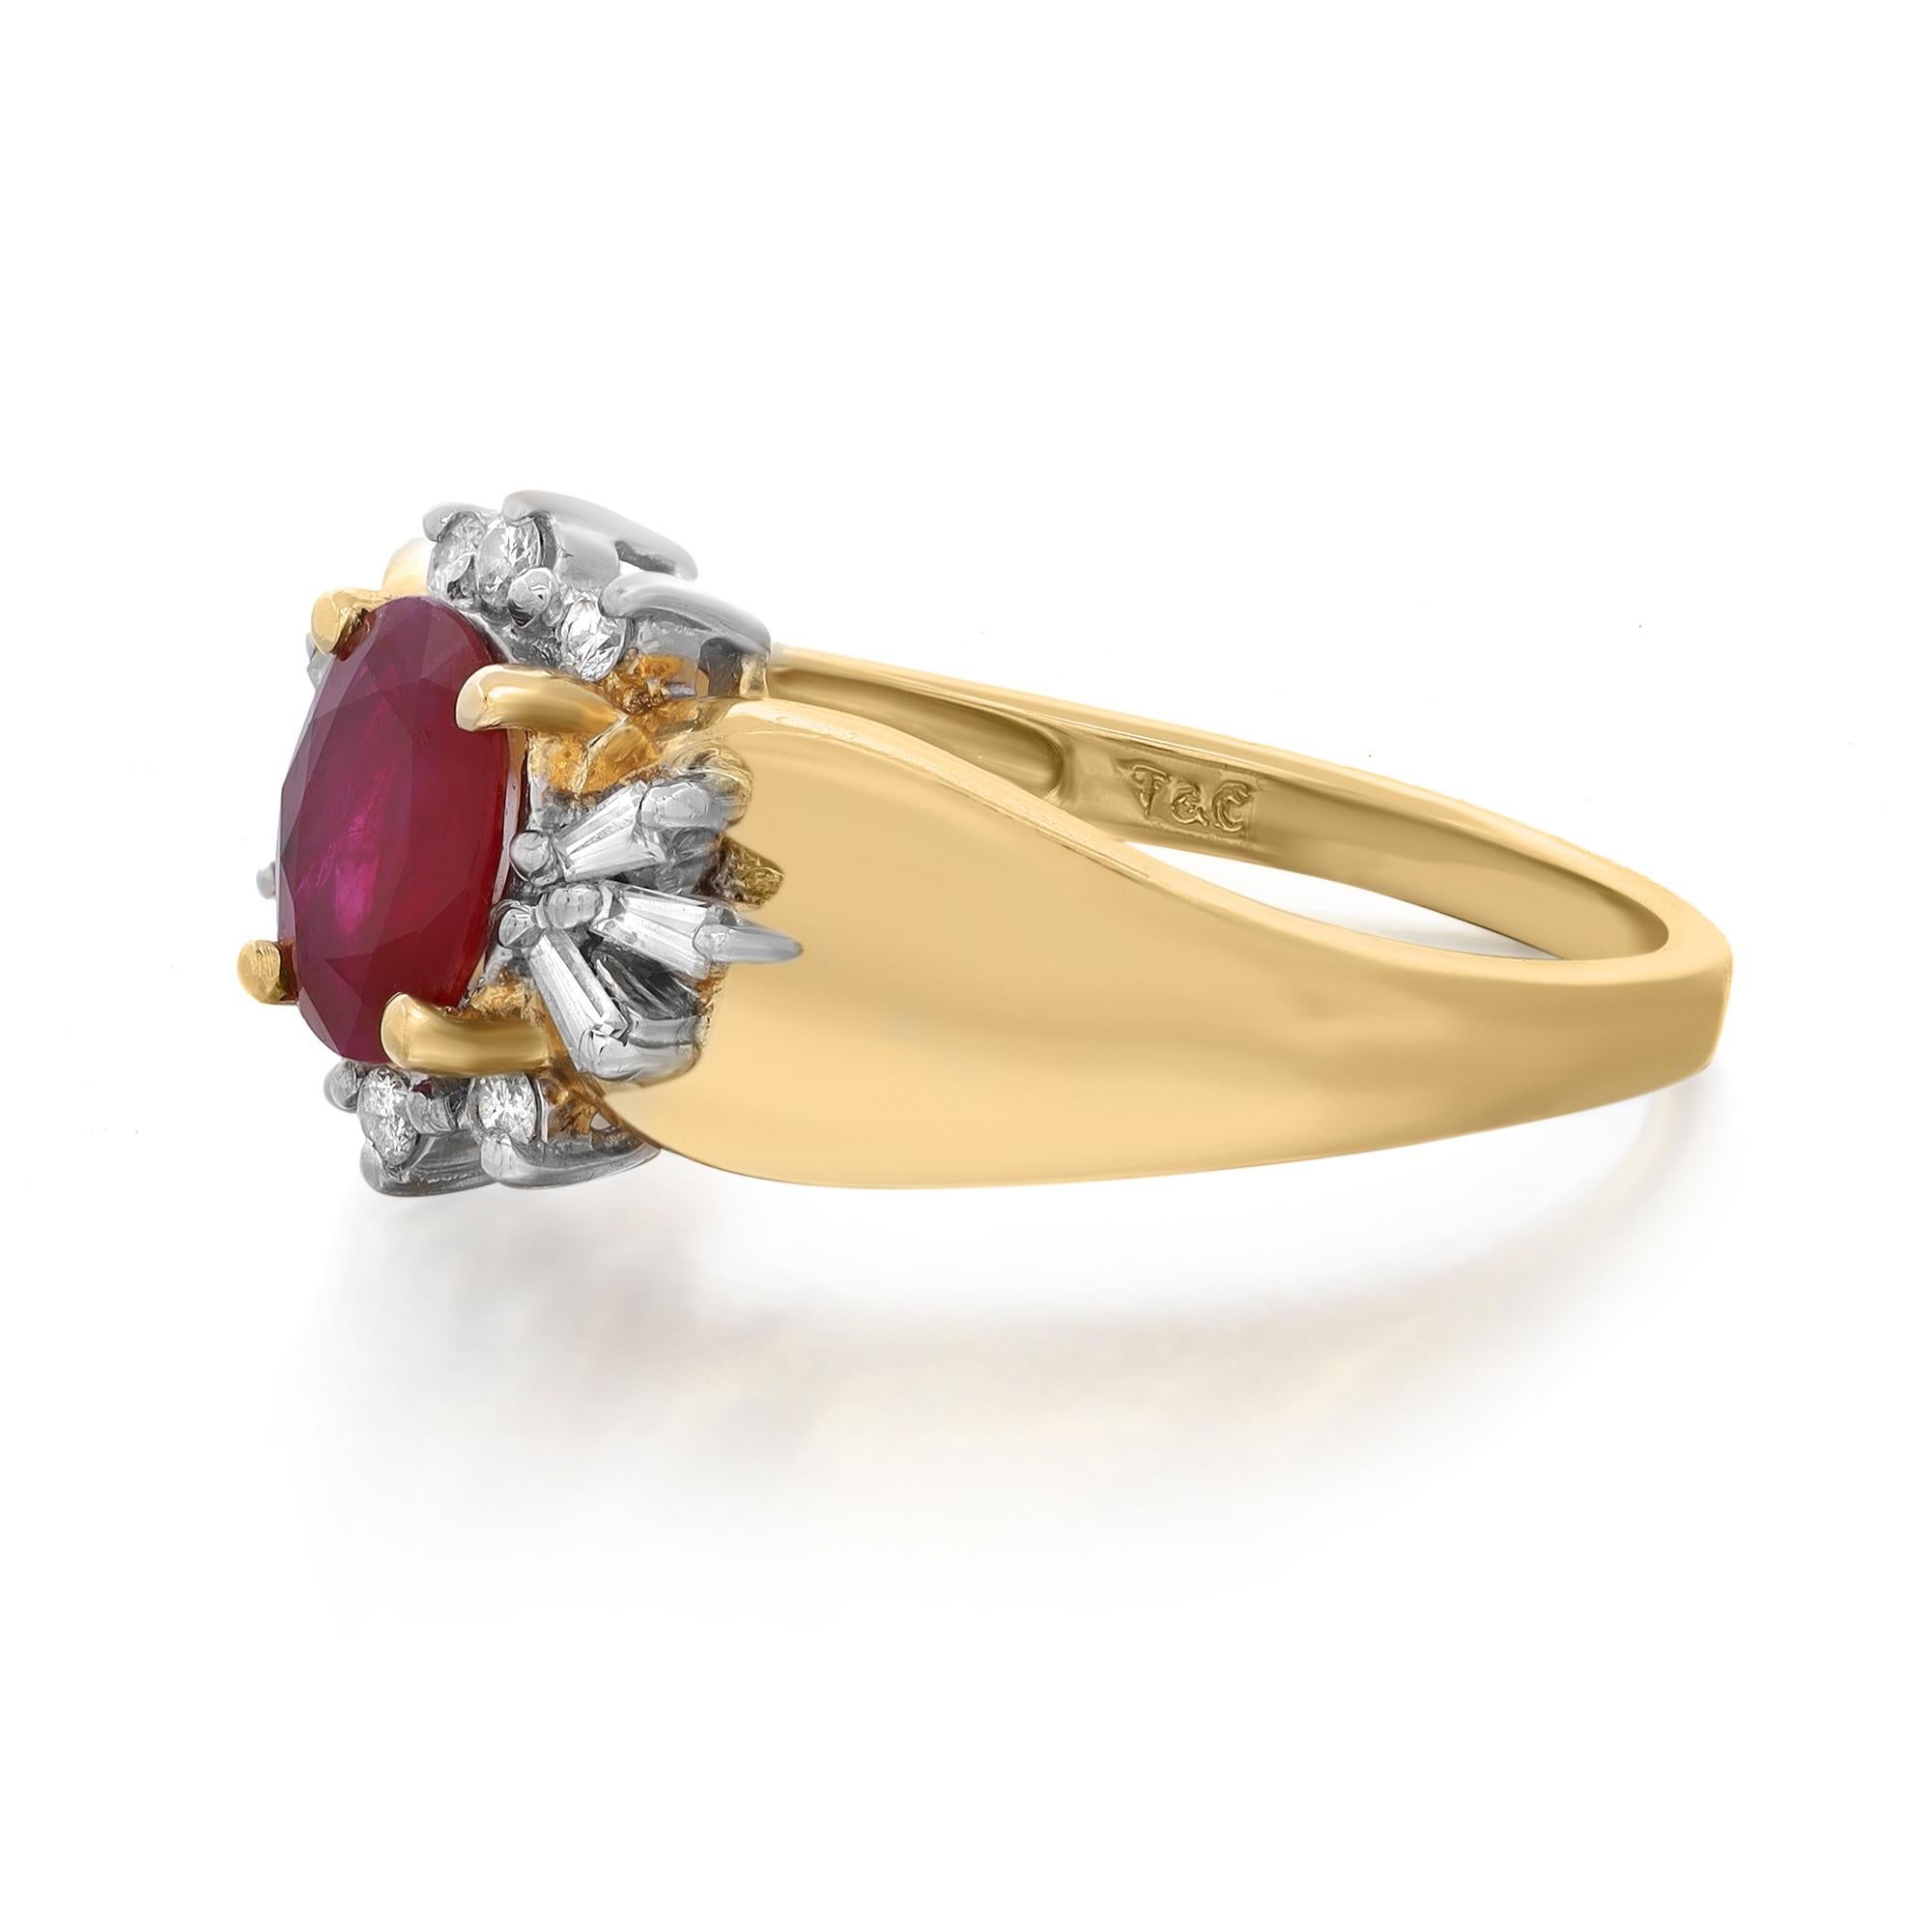 This beautiful ladies ring features a medium red oval brilliant cut ruby weighing 0.55 carats as center stone surrounded with 12 round and baguette cut diamonds weighing 0.18 carat. Diamond quality: H color and SI1 clarity. Crafted in high polished